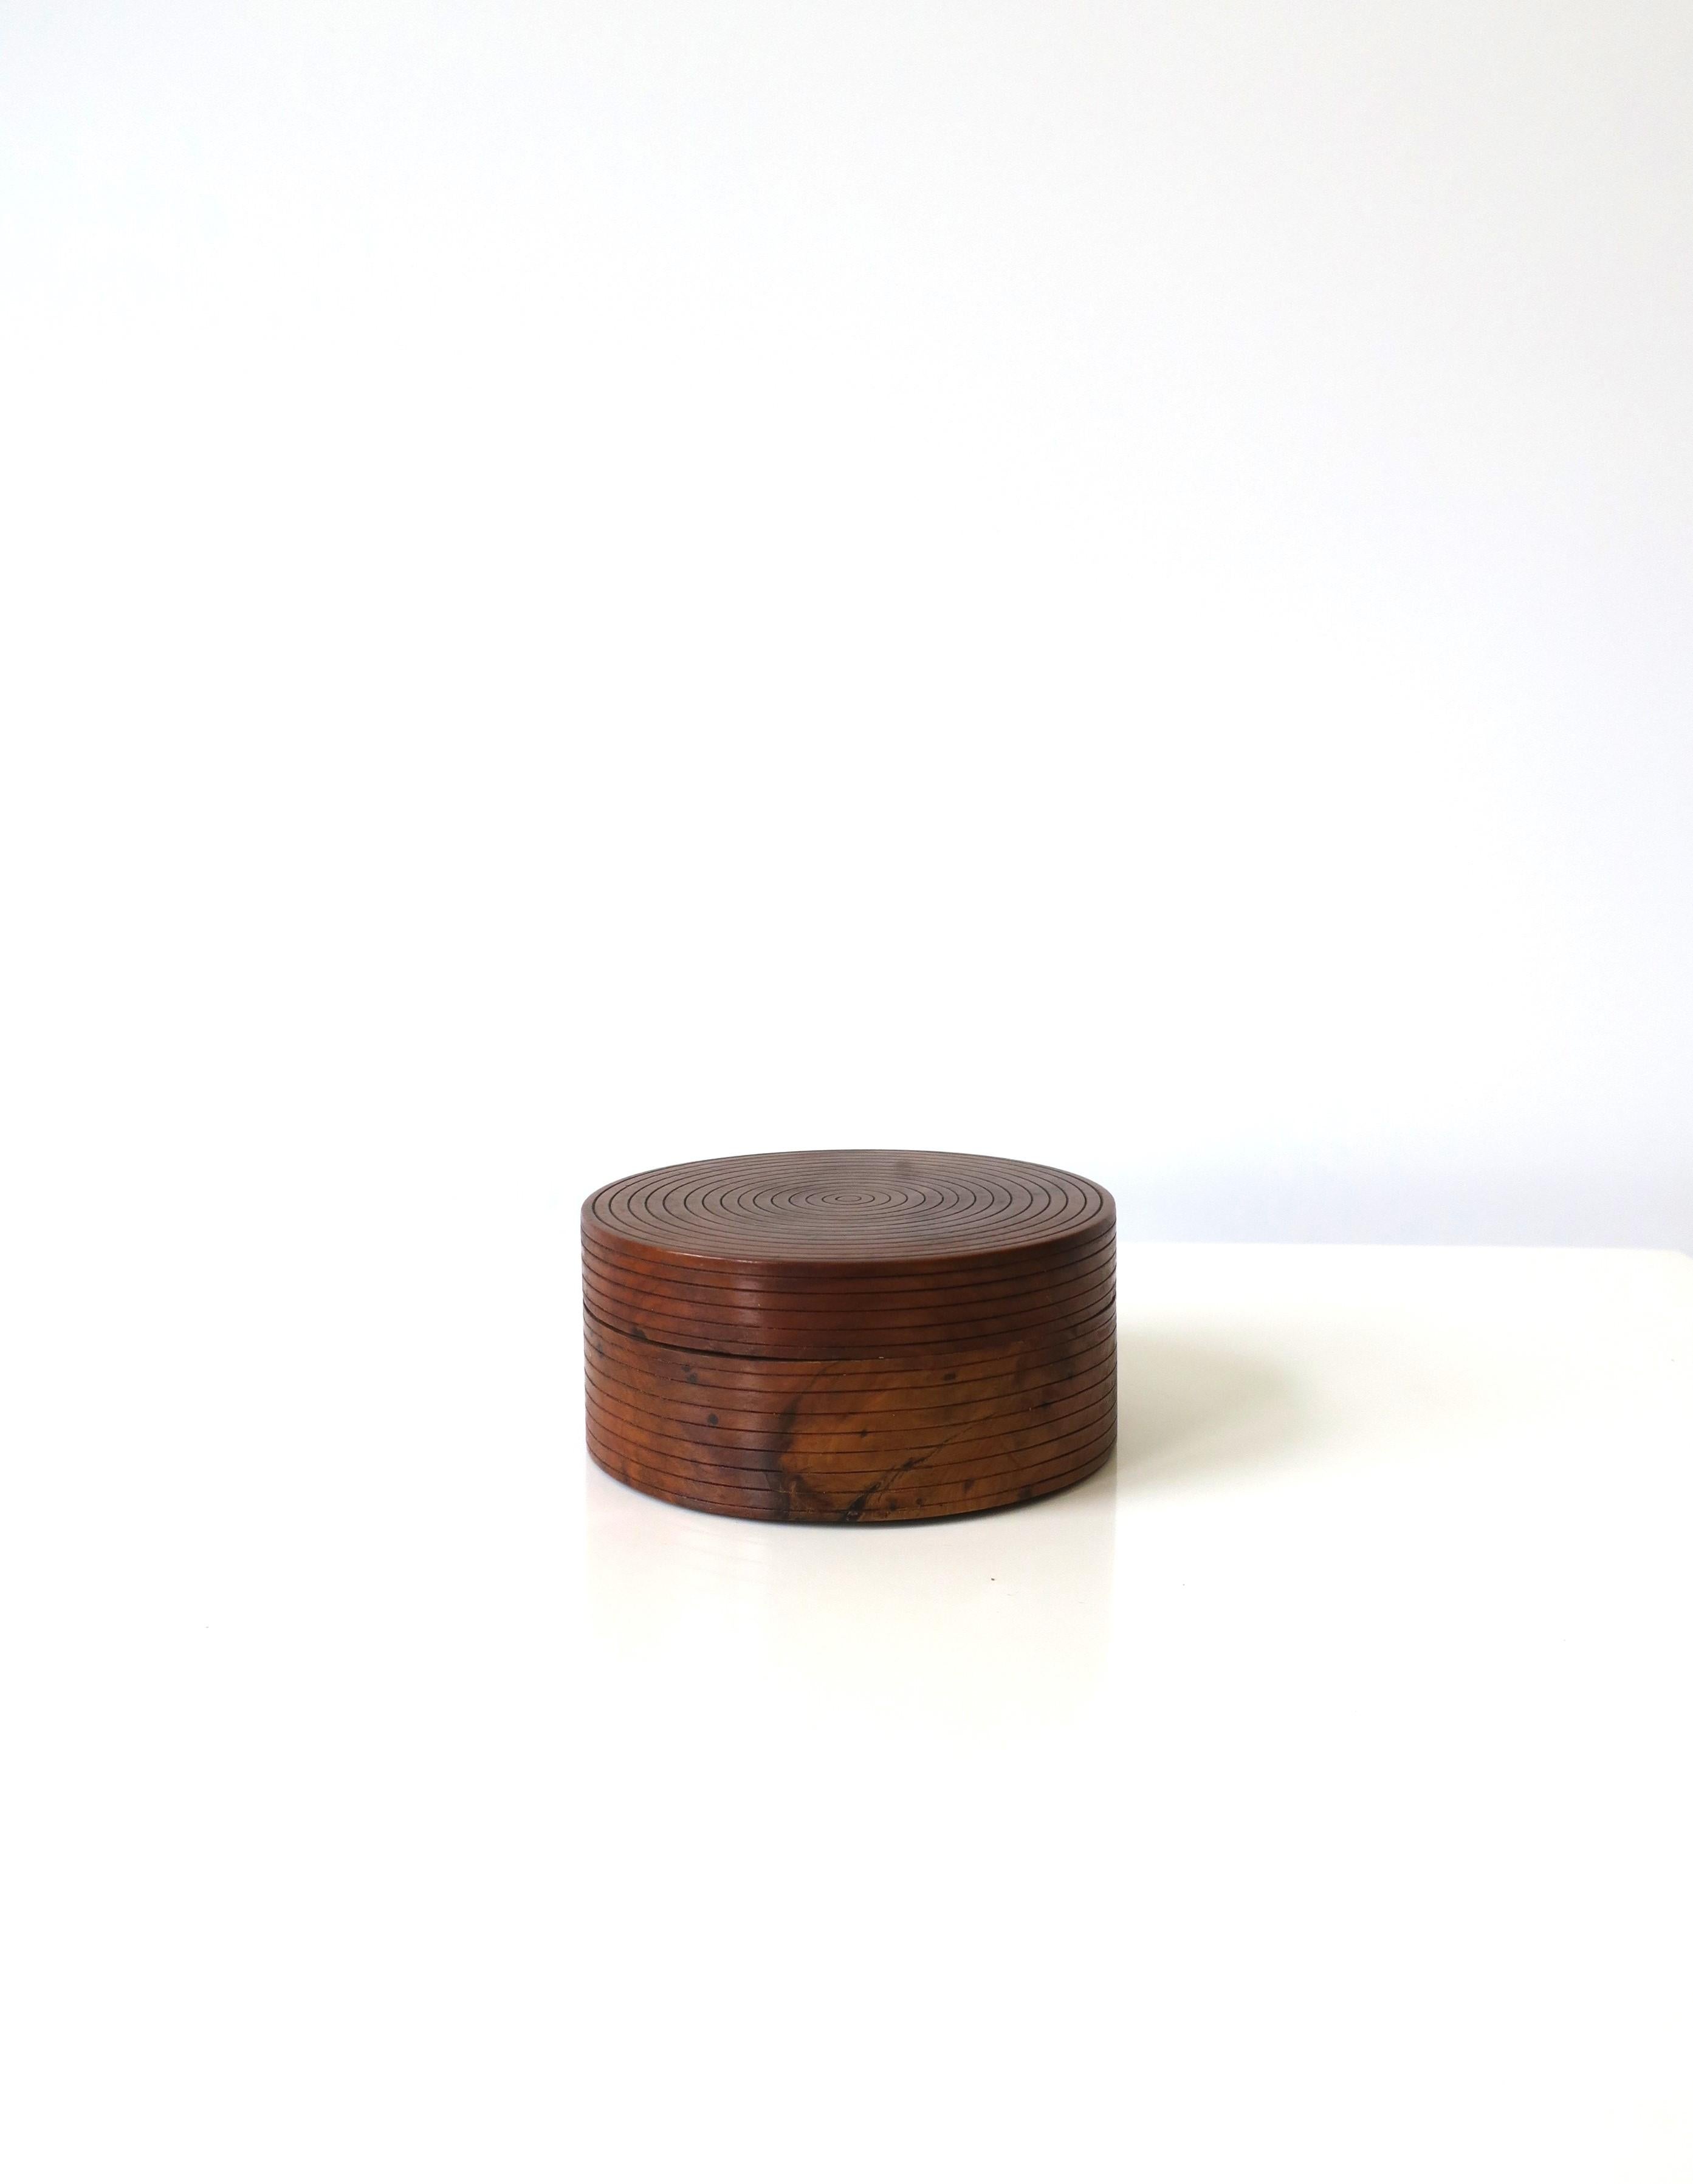 A beautiful rich brown burl wood round box with circular detail in the Minimalist style, circa late-20th century. A great box for any vanity or desk area for jewelry or small items. Dimensions: 3.94